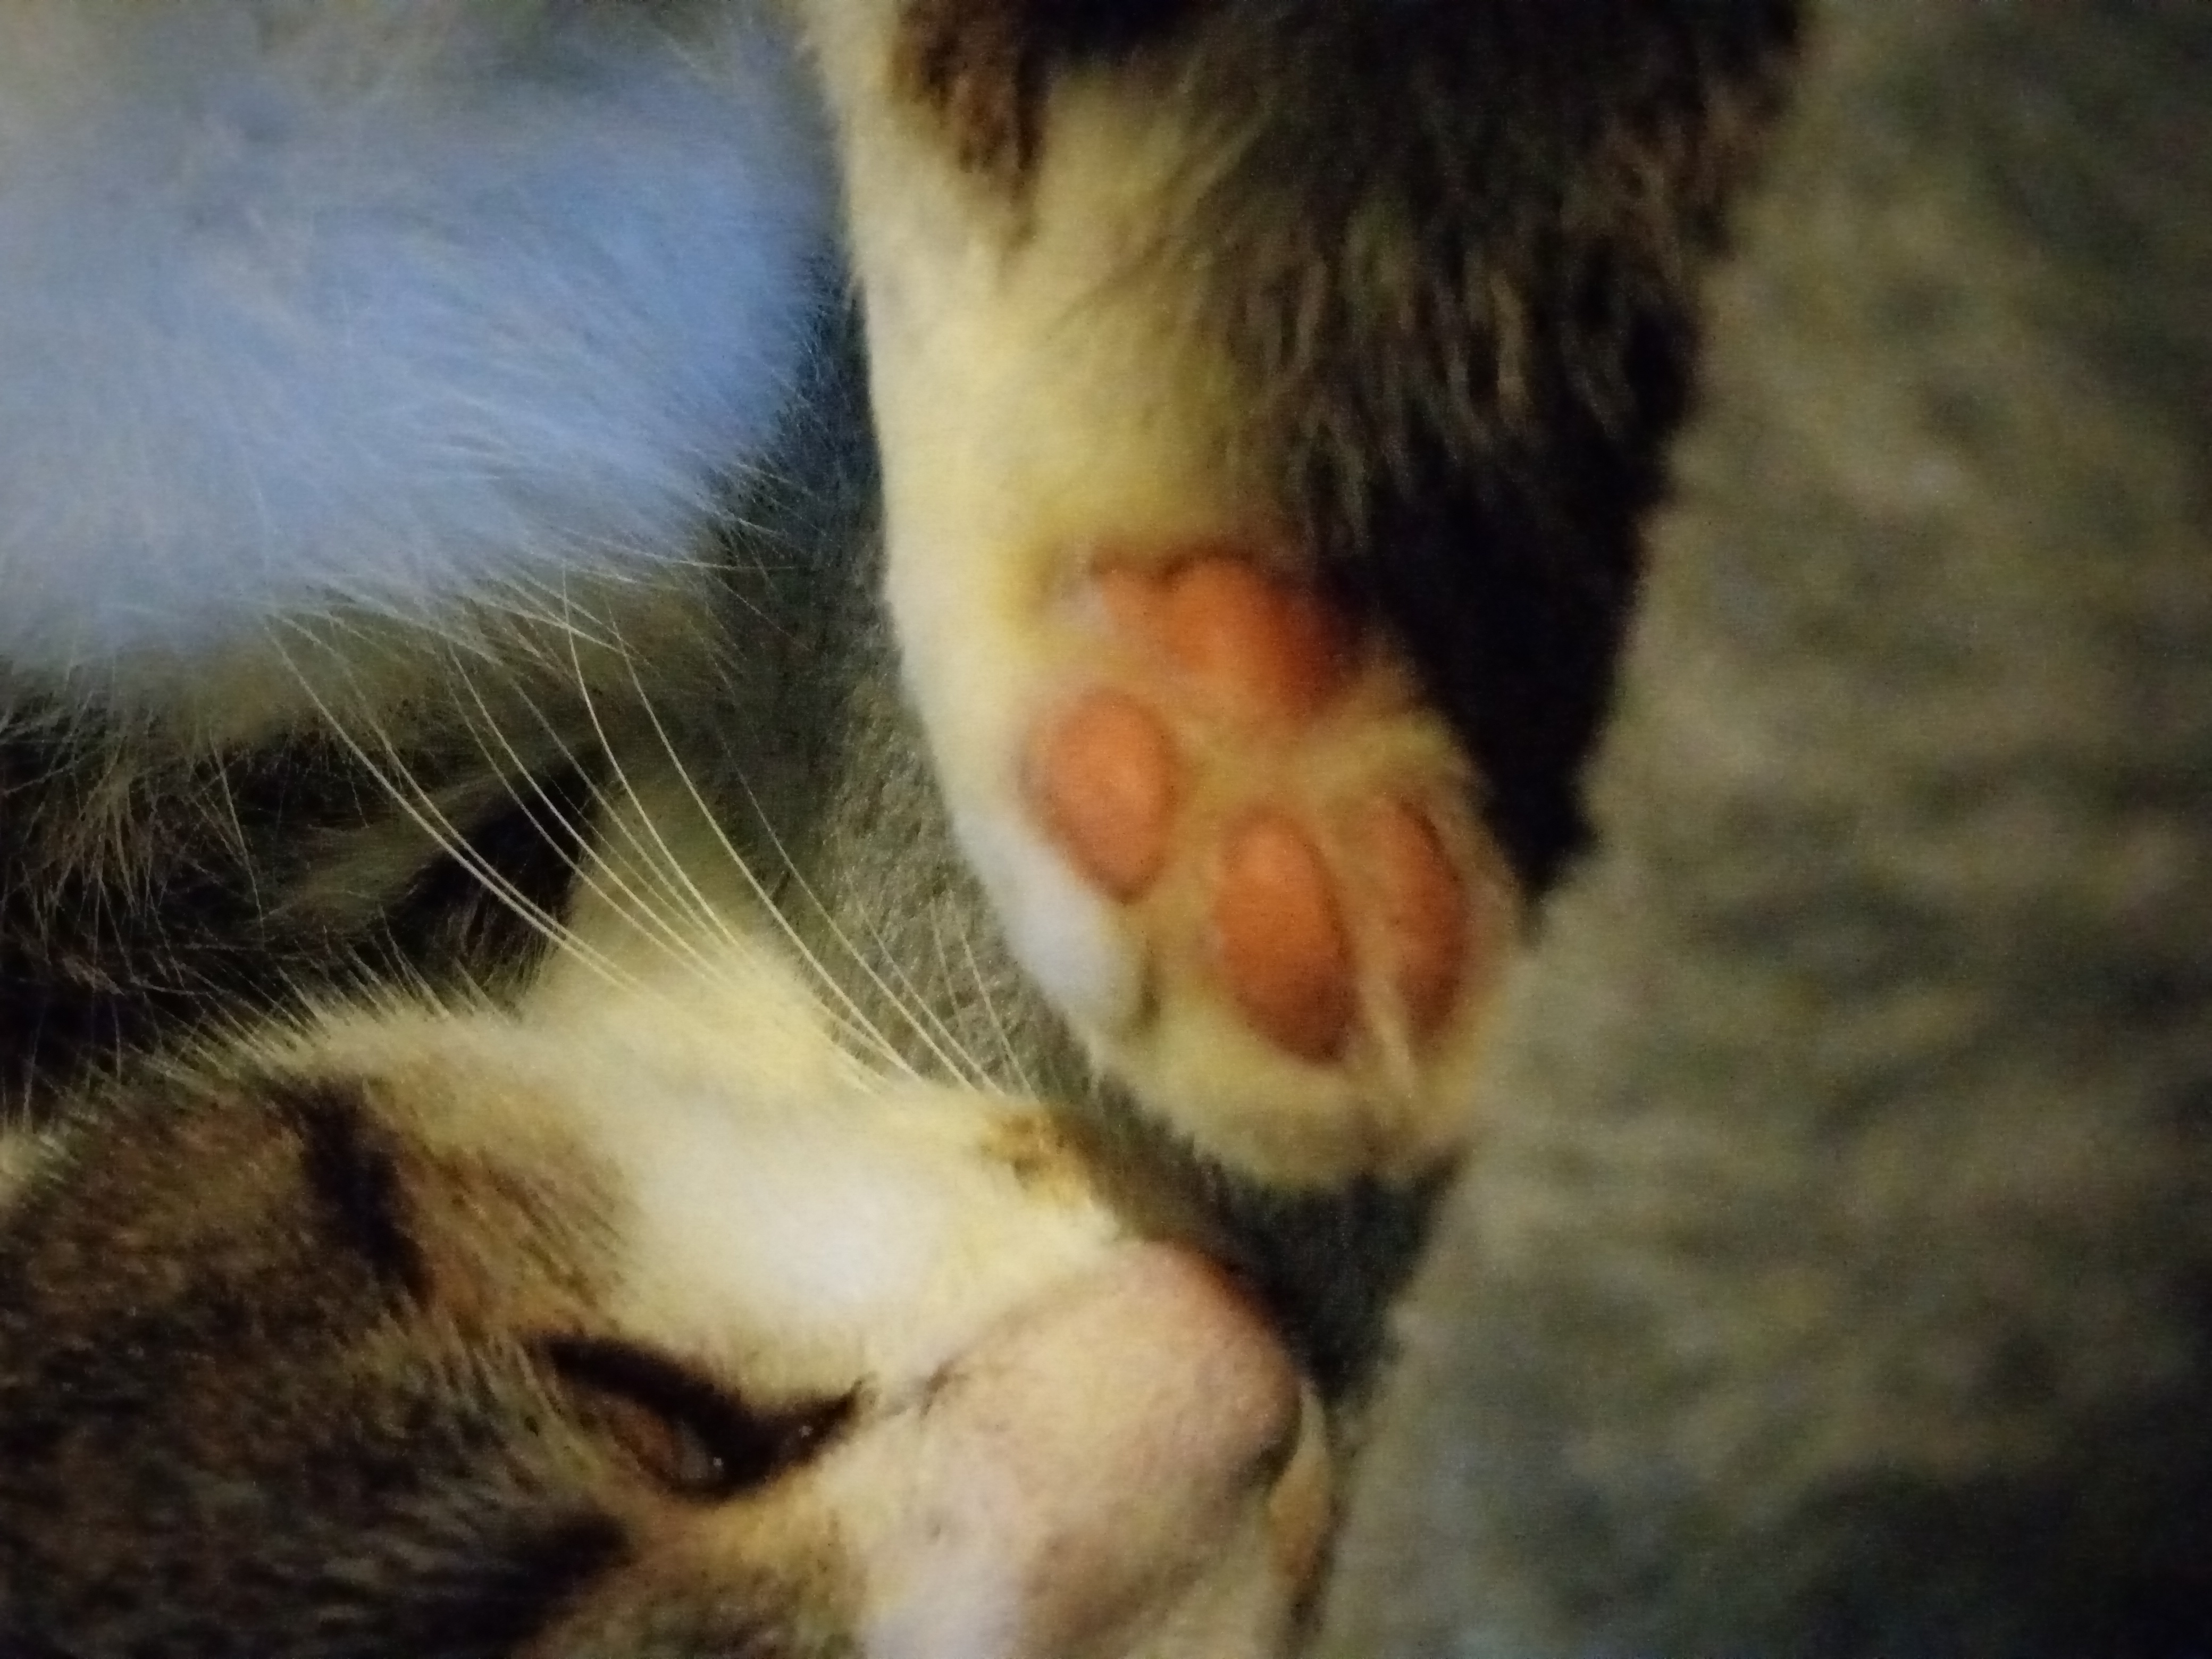 gray and white cat's foot with pink toe beans